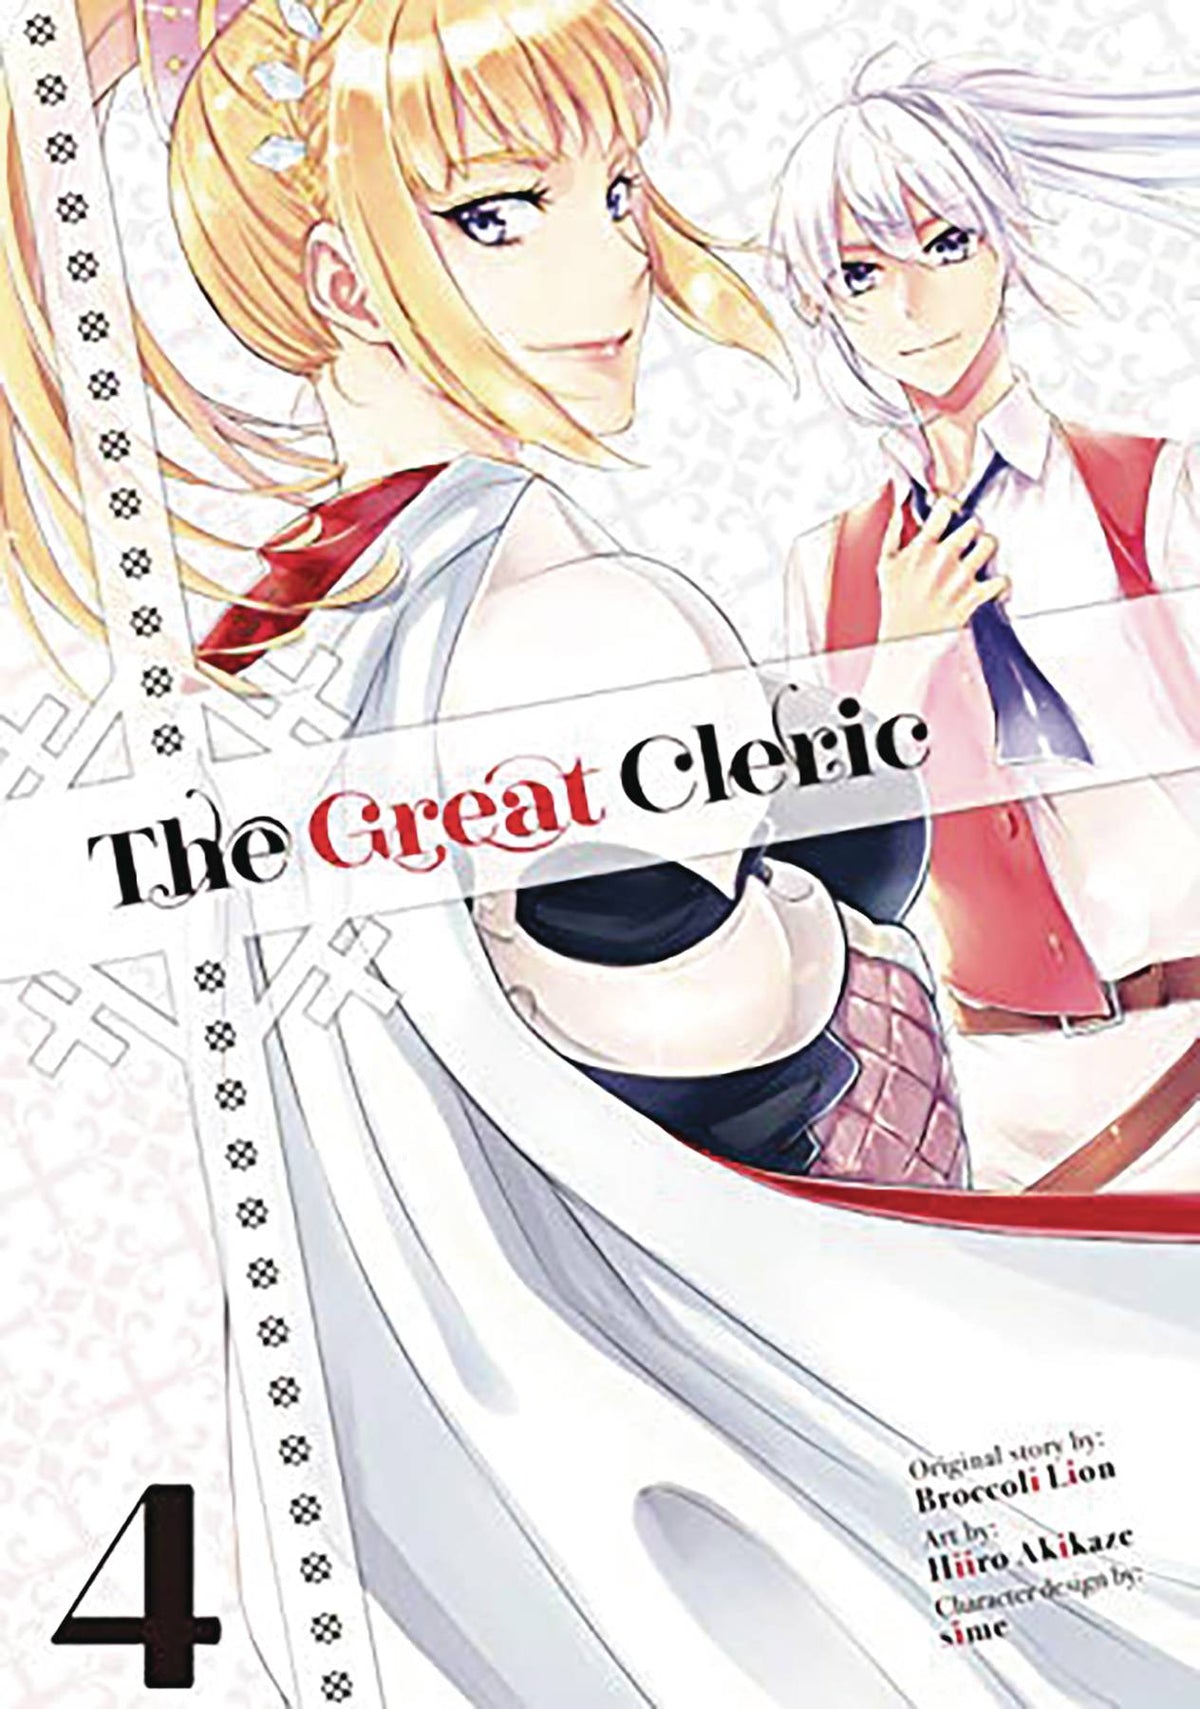 GREAT CLERIC GN VOL 04 - Third Eye